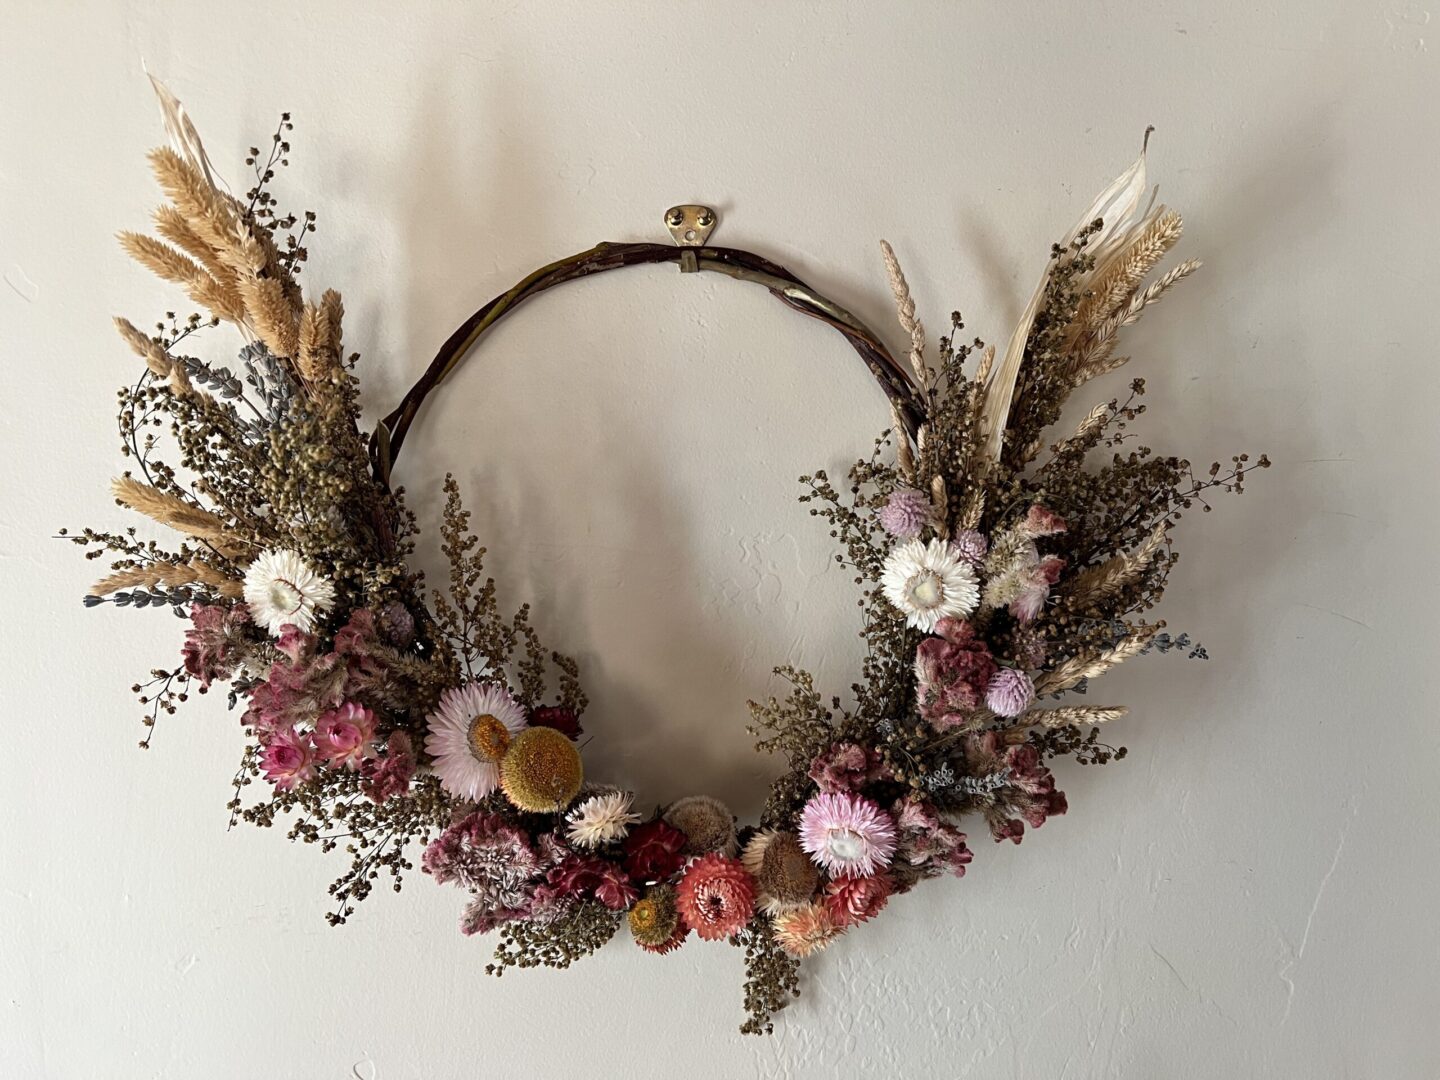 A wreath of dried flowers hanging on the wall.